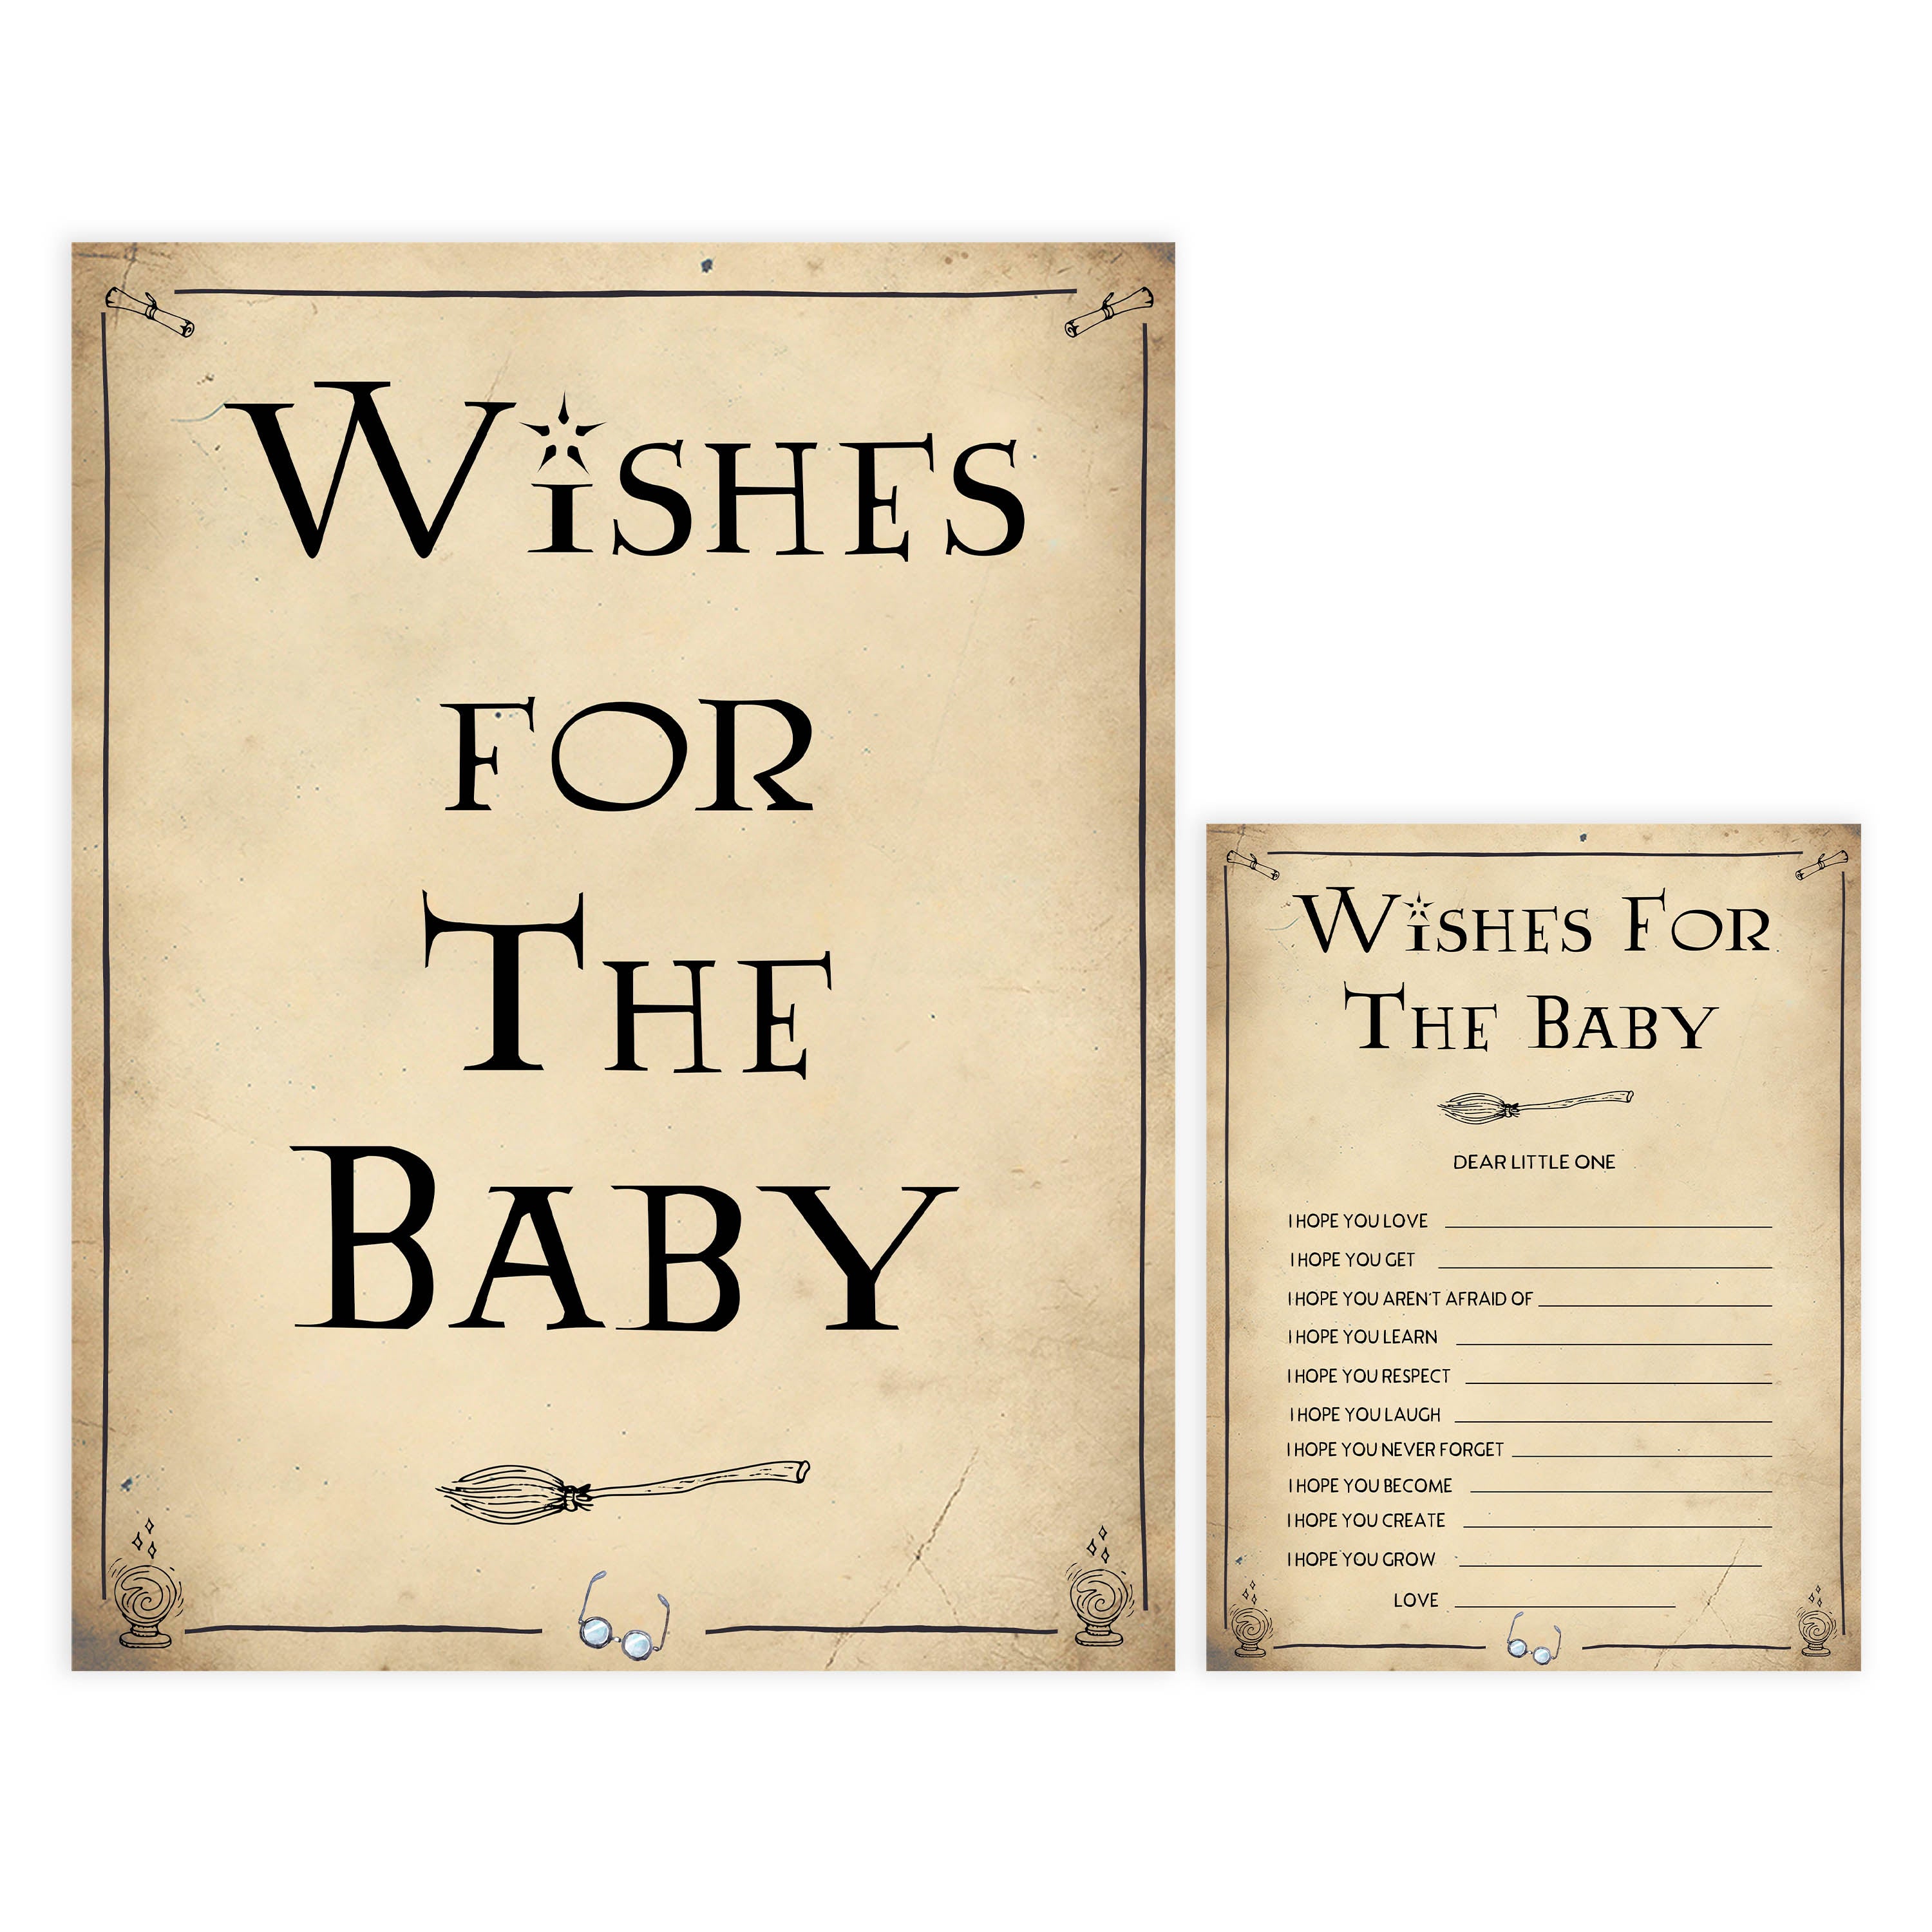 Harry Potter Baby Shower Ideas & Free Printables - Our Handcrafted